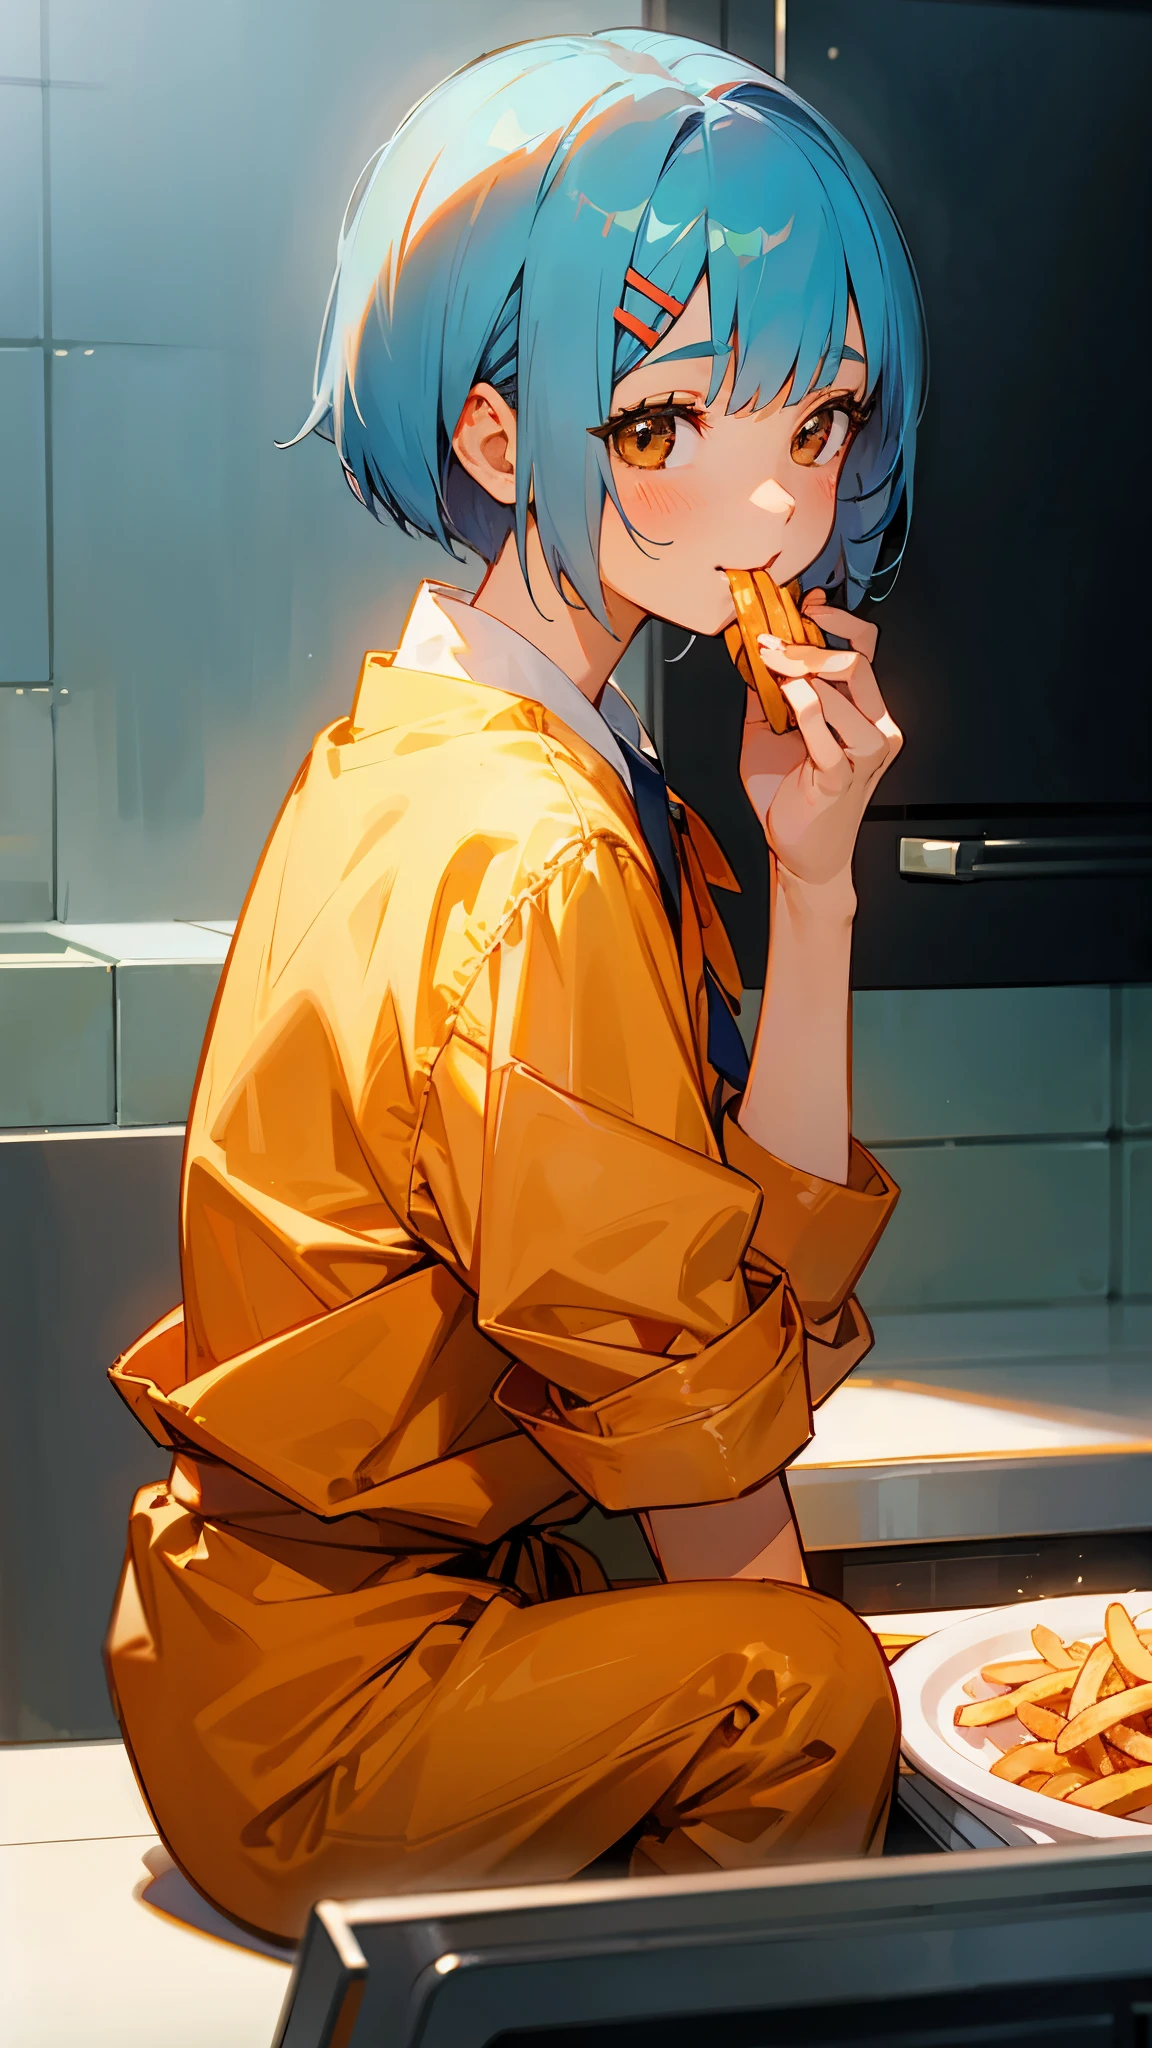 1 girl、anime picture、kitchen、Cute woman cooking delicious food、Eating French Fries、shrimp、light blue hair、short bob hairstyle、Tie your hair with an orange hair clip、Beautiful brown eyes、smile、From the side、sharp outline、background bokeh、written boundary depth